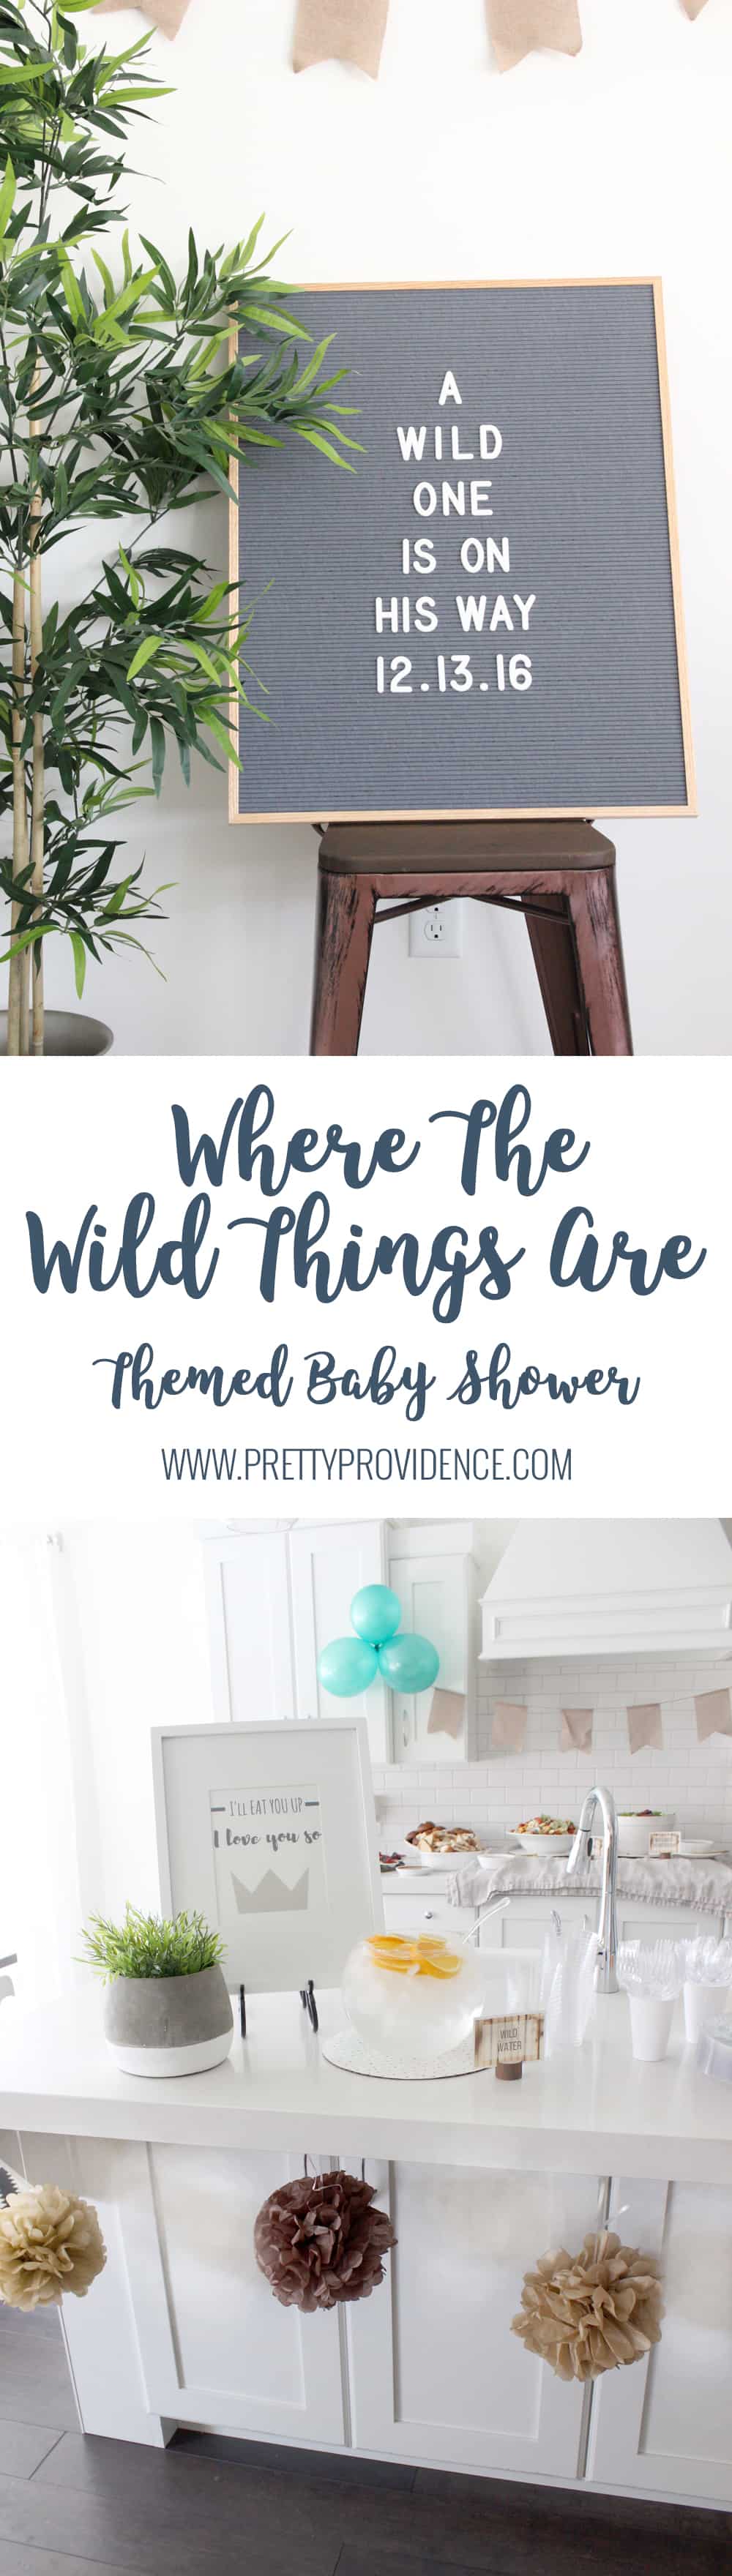 Where the Wild Things Are Woodland Theme Baby Shower